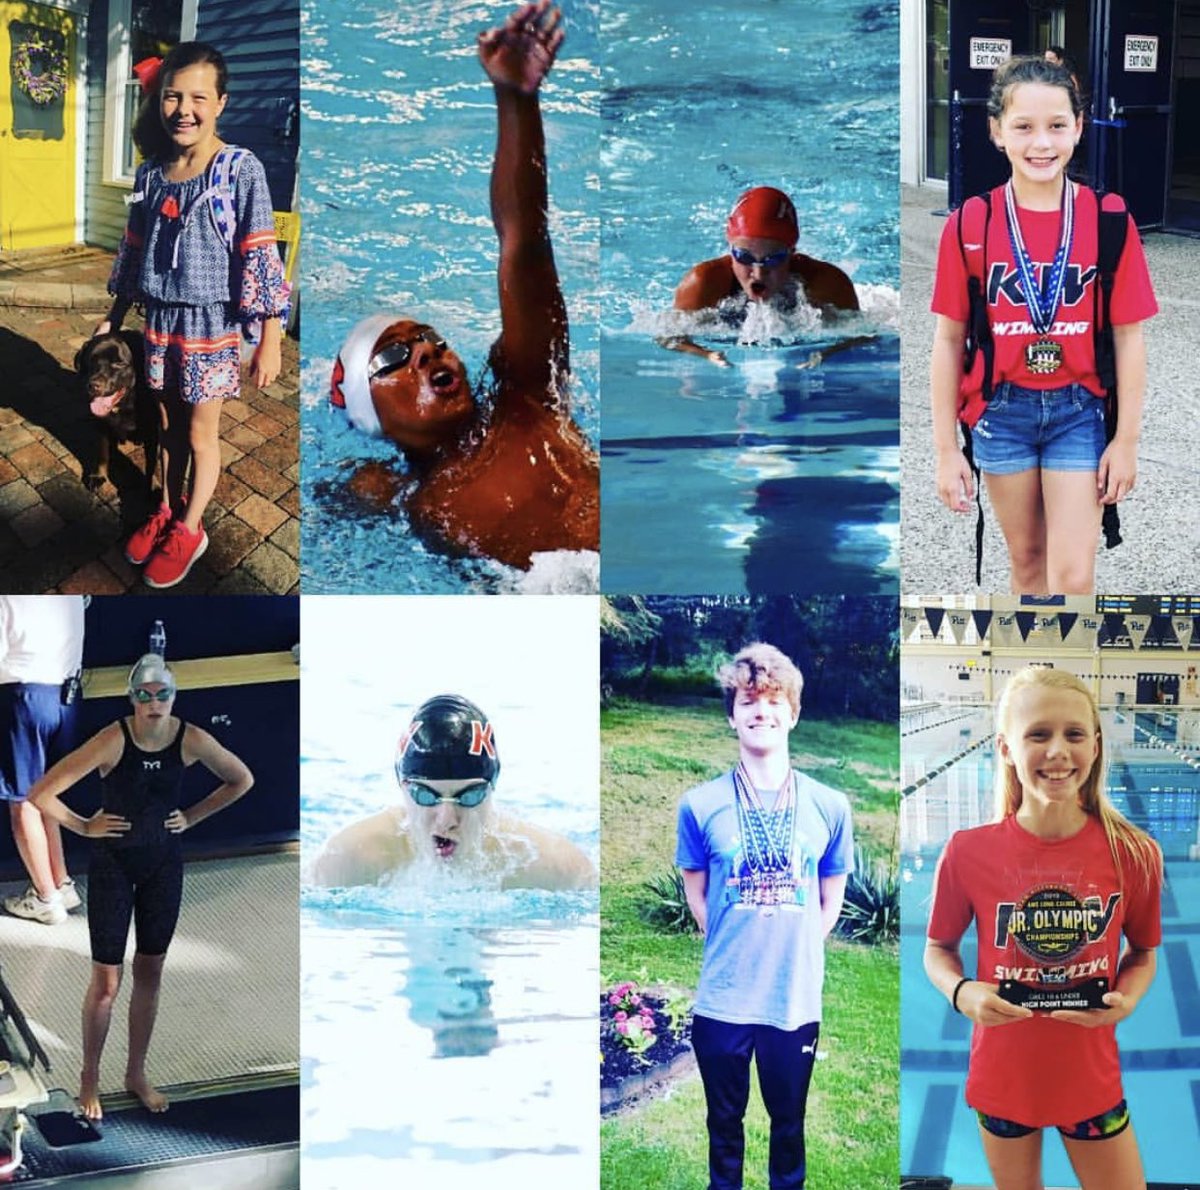 Good luck to the killer whales zone team qualifiers! Charlotte, Christian,  Kira, Delaney, Payton, Emmanuel, Nate and Kasey! We are proud of you! #kwswimming #usaswimming #amzt19 #easternzone #agegroupchampionships #zones #summerswimming